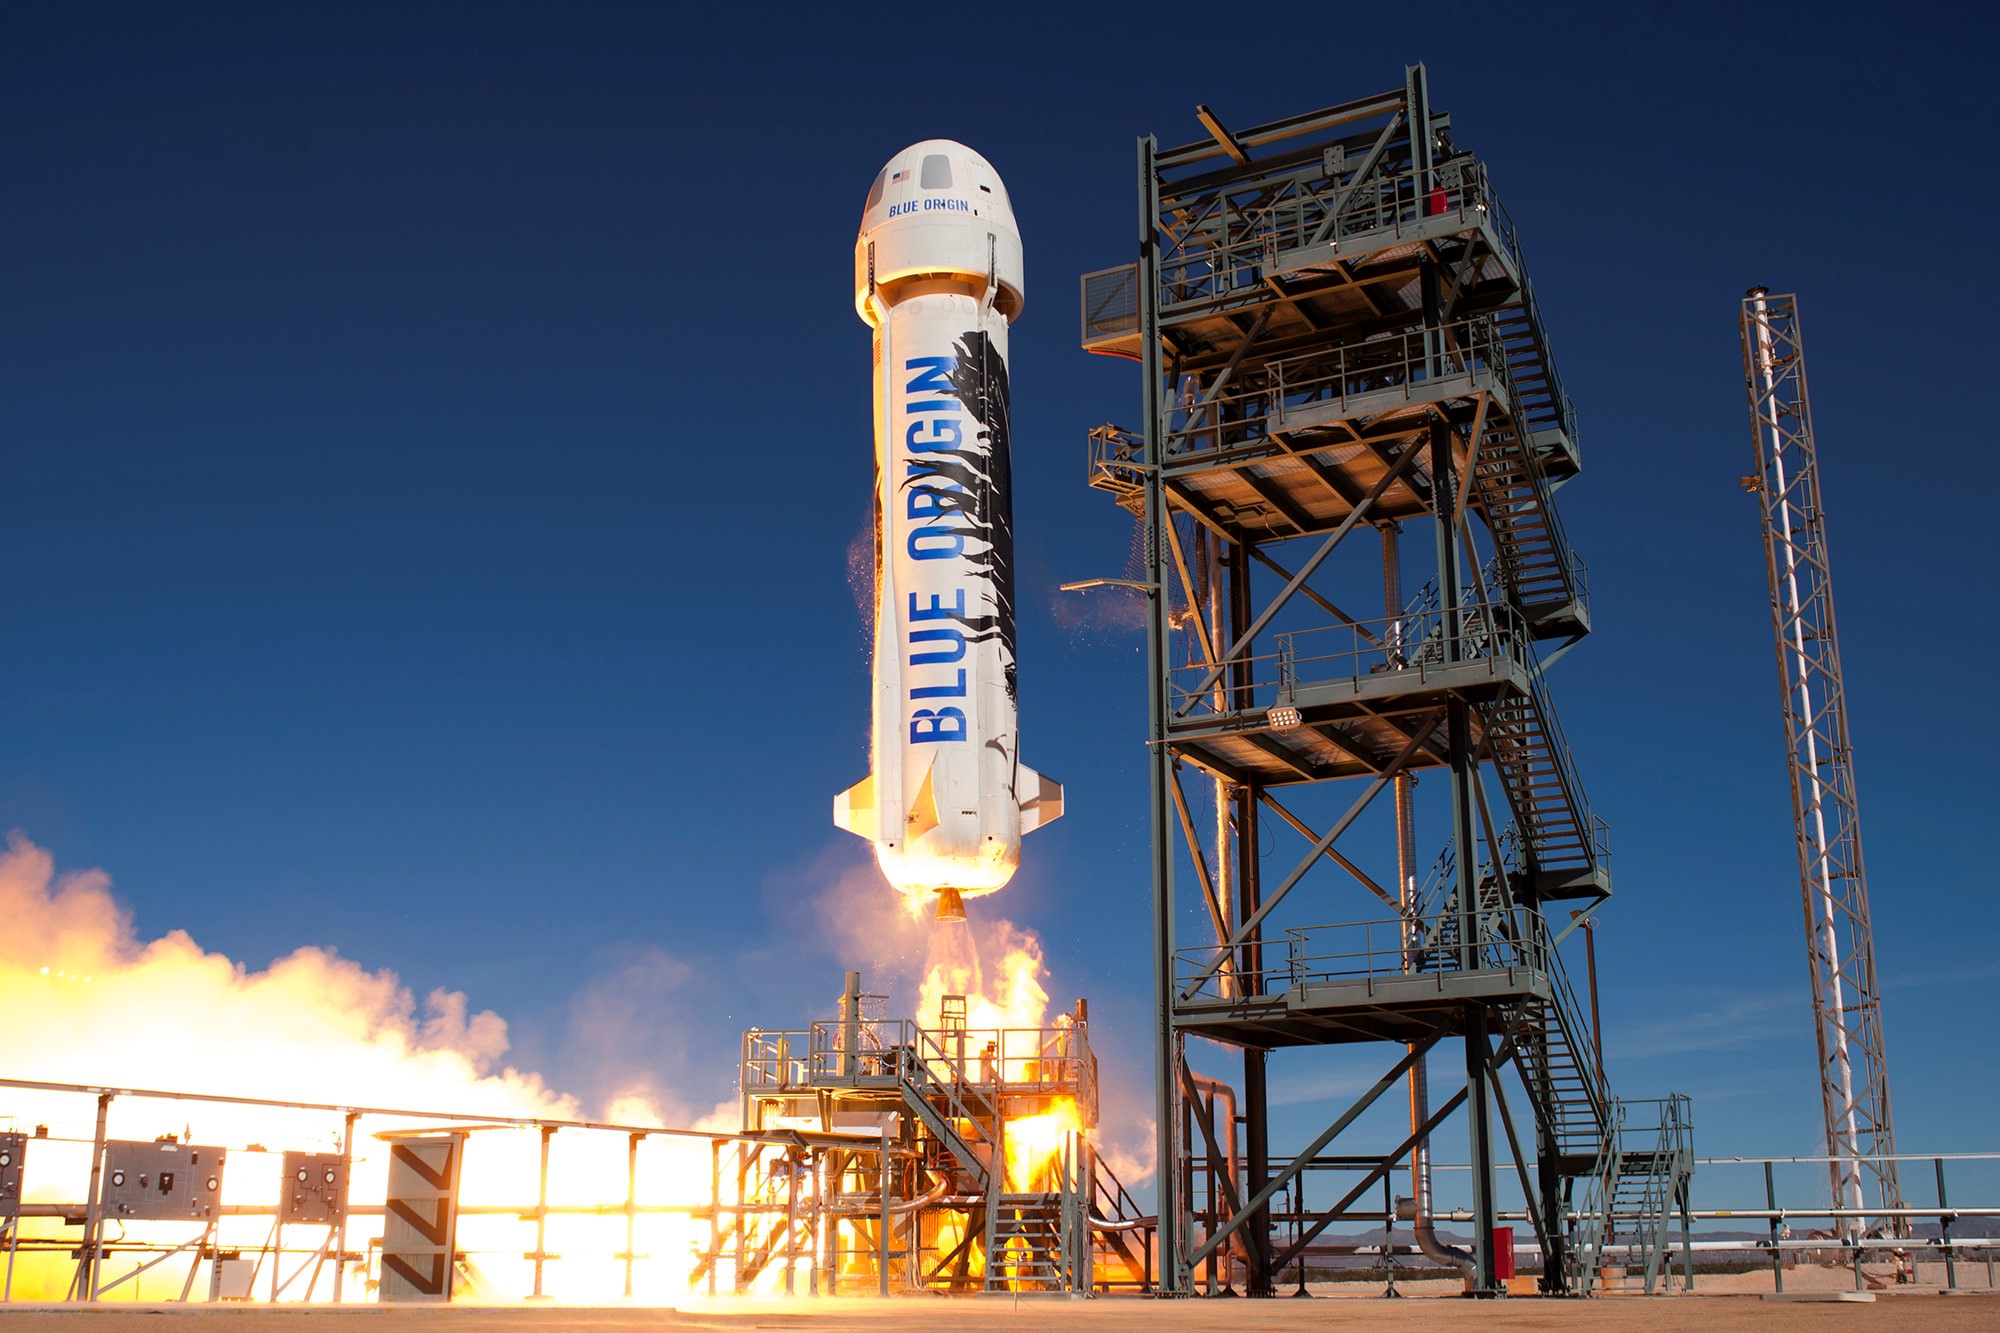 The New Shepard launching from its facility in West Texas. Image: Blue Origin